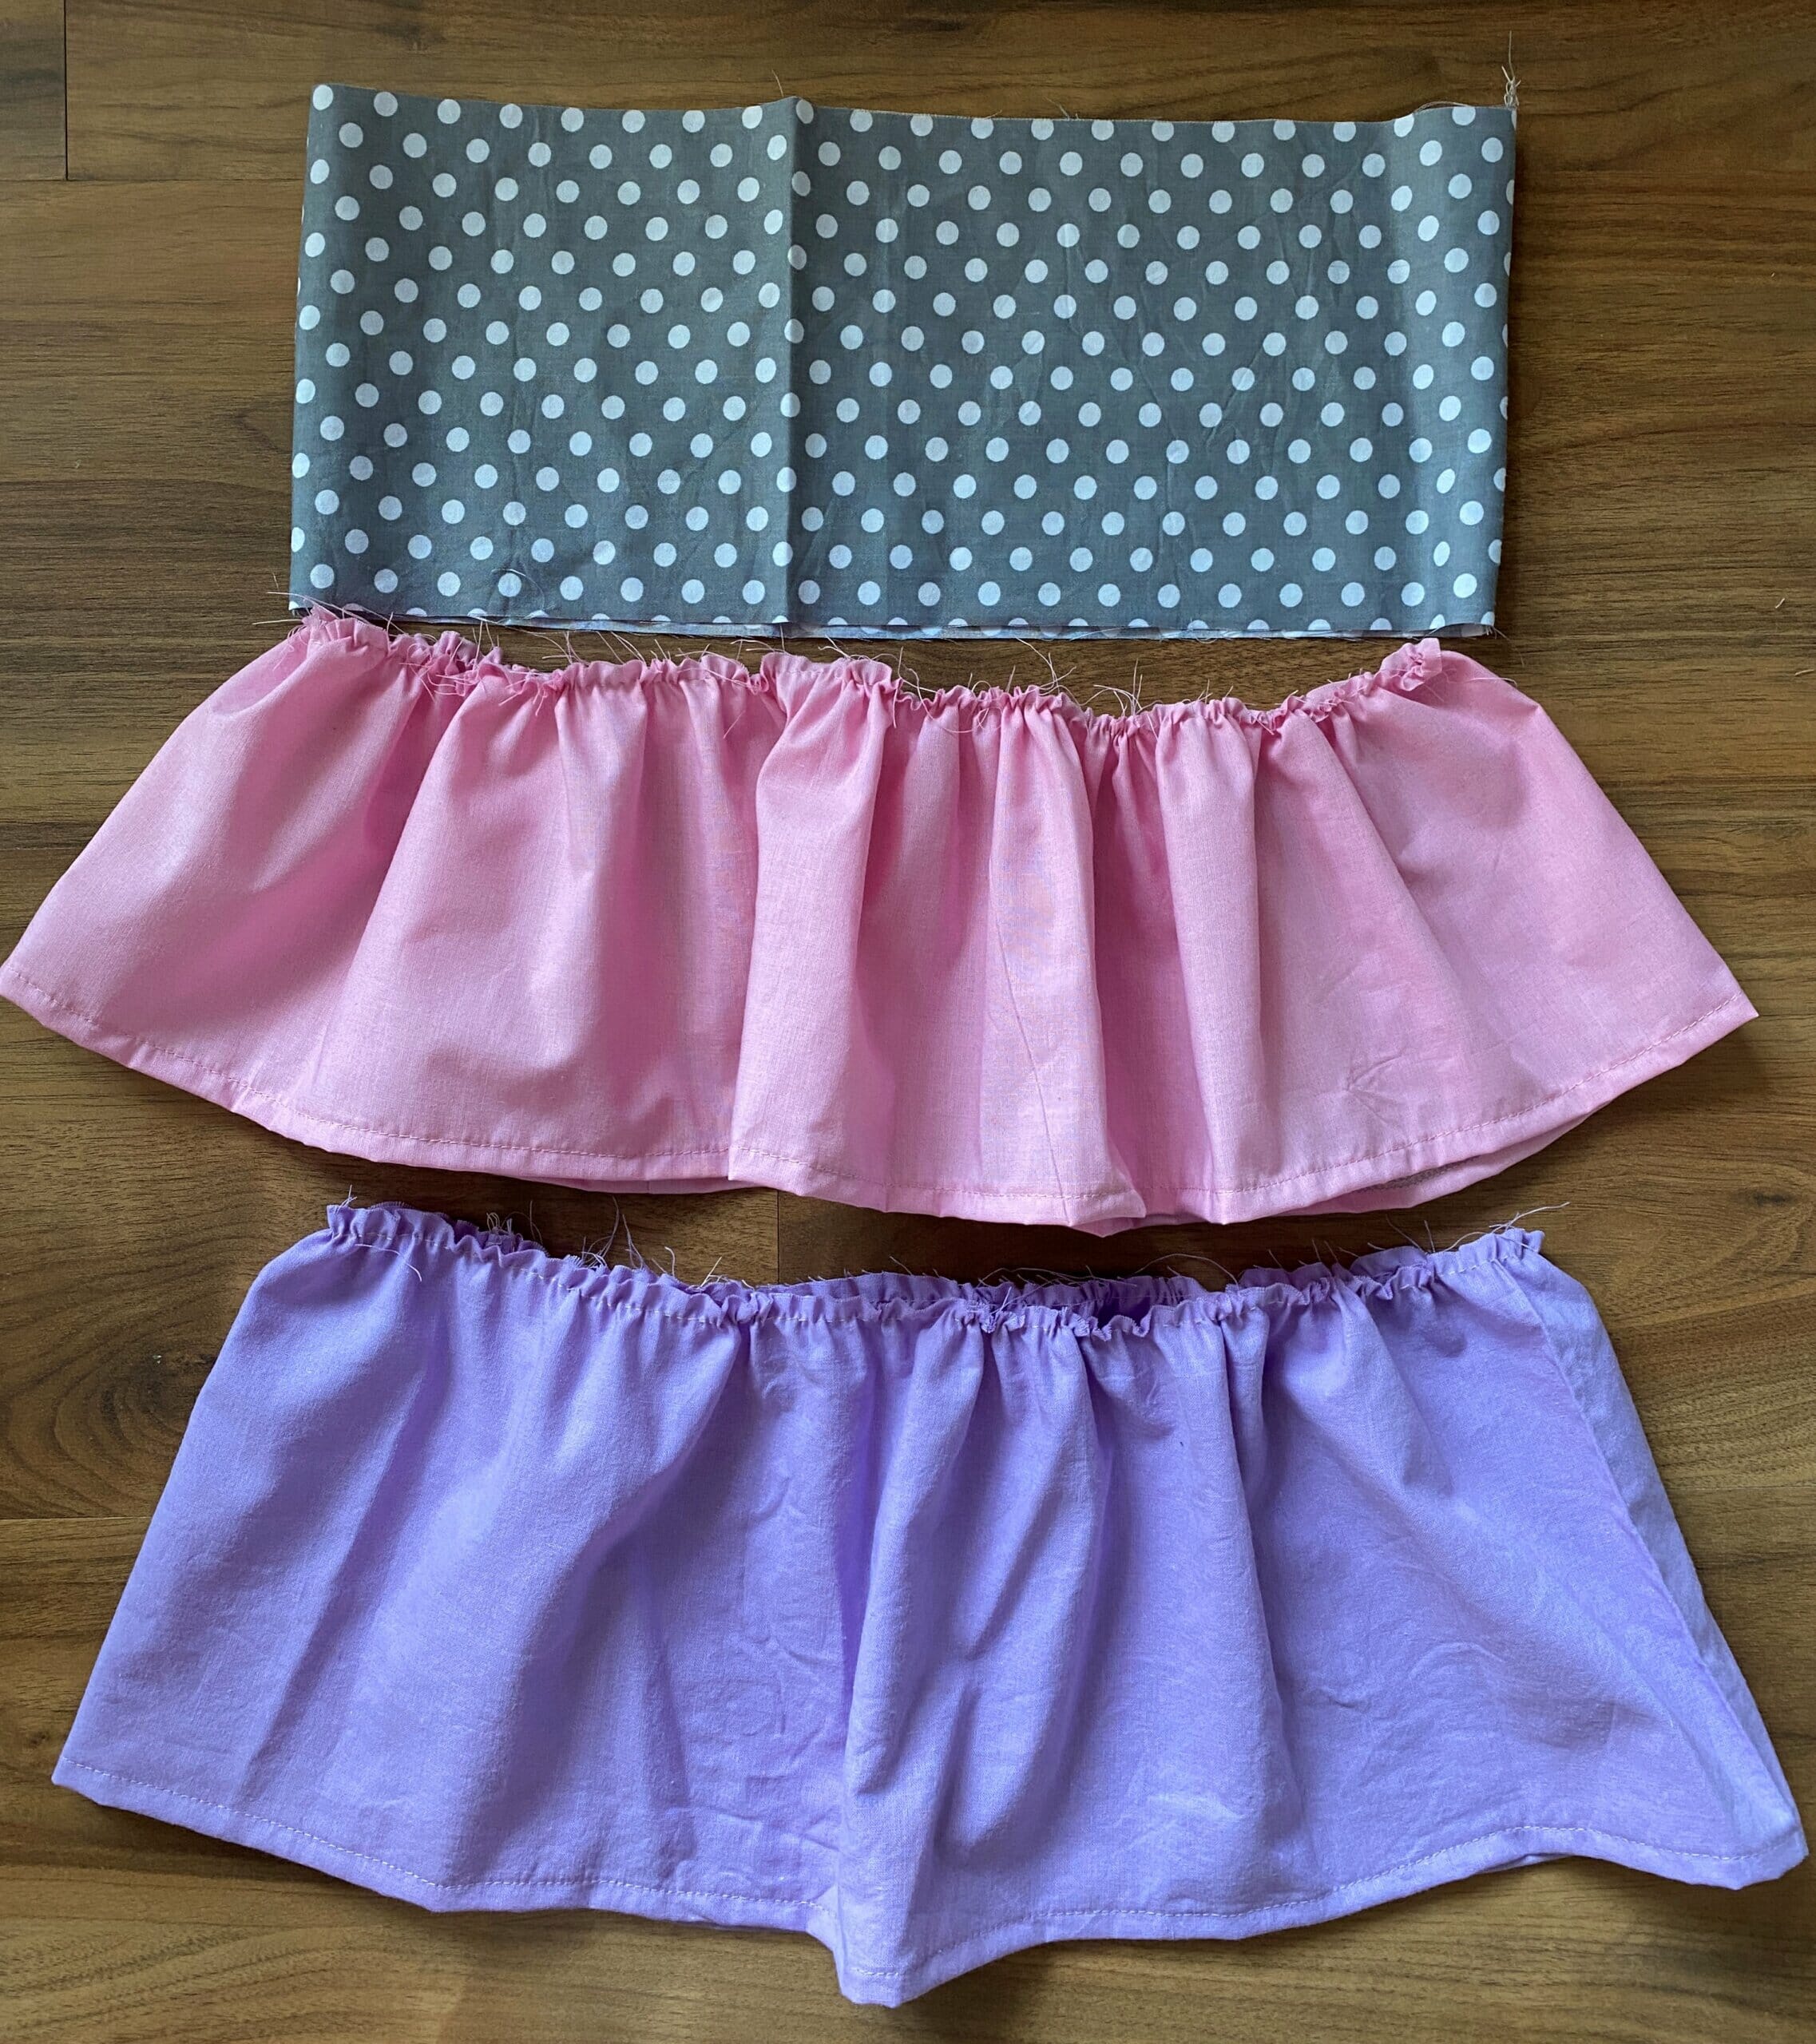 Tutorial Gathered skirt with a lace ruffle hem  Sewing